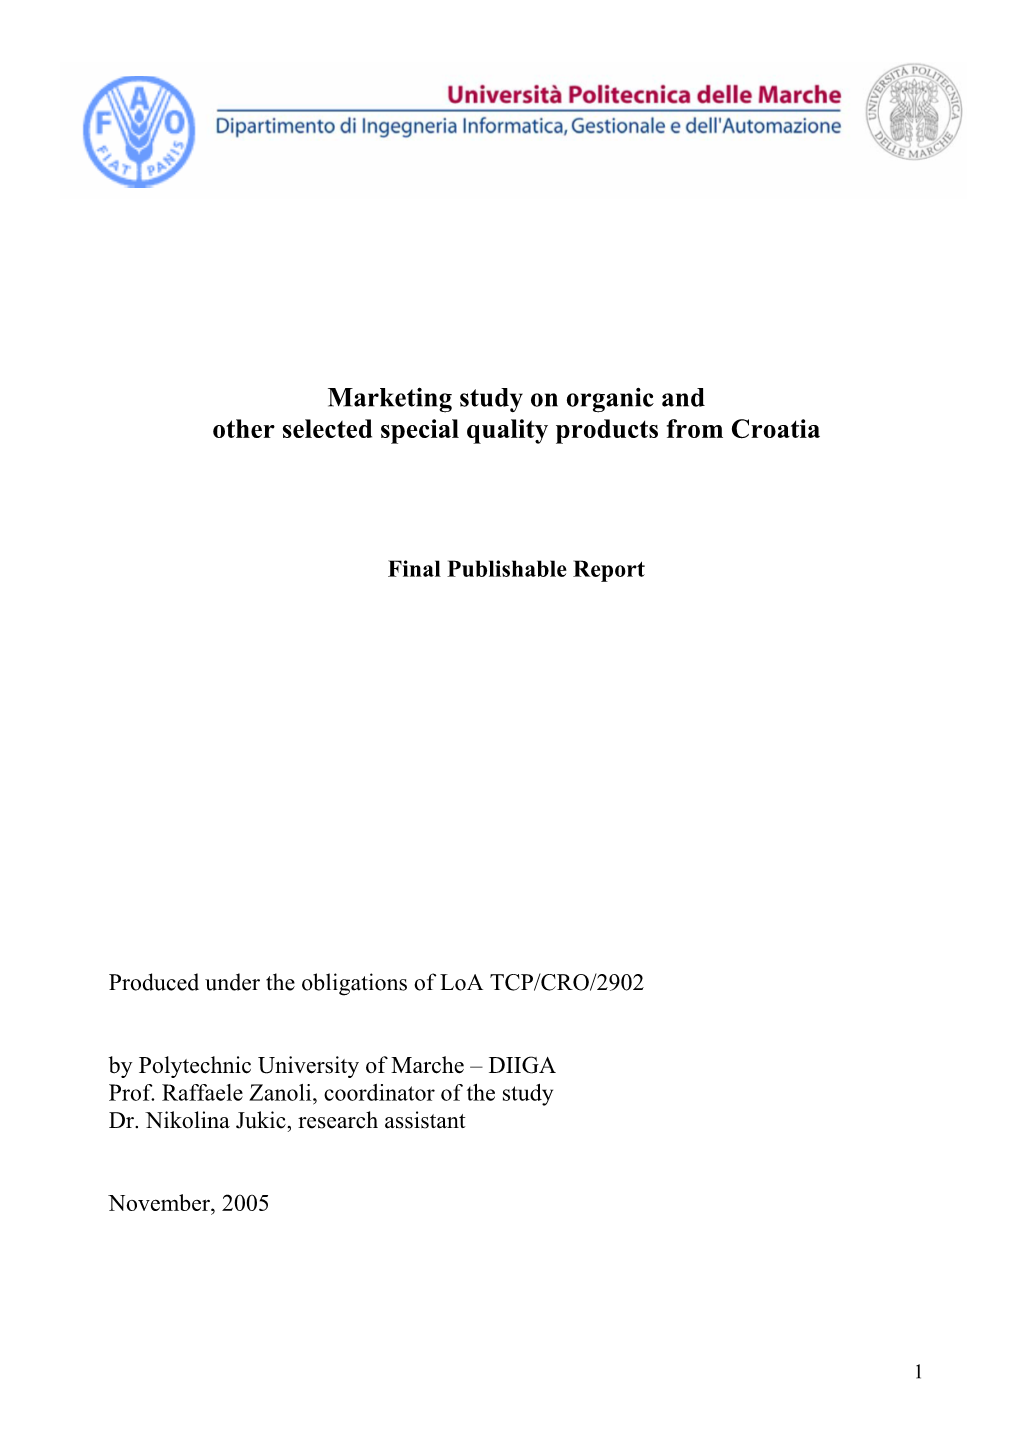 Marketing Study on Organic and Other Selected Special Quality Products from Croatia